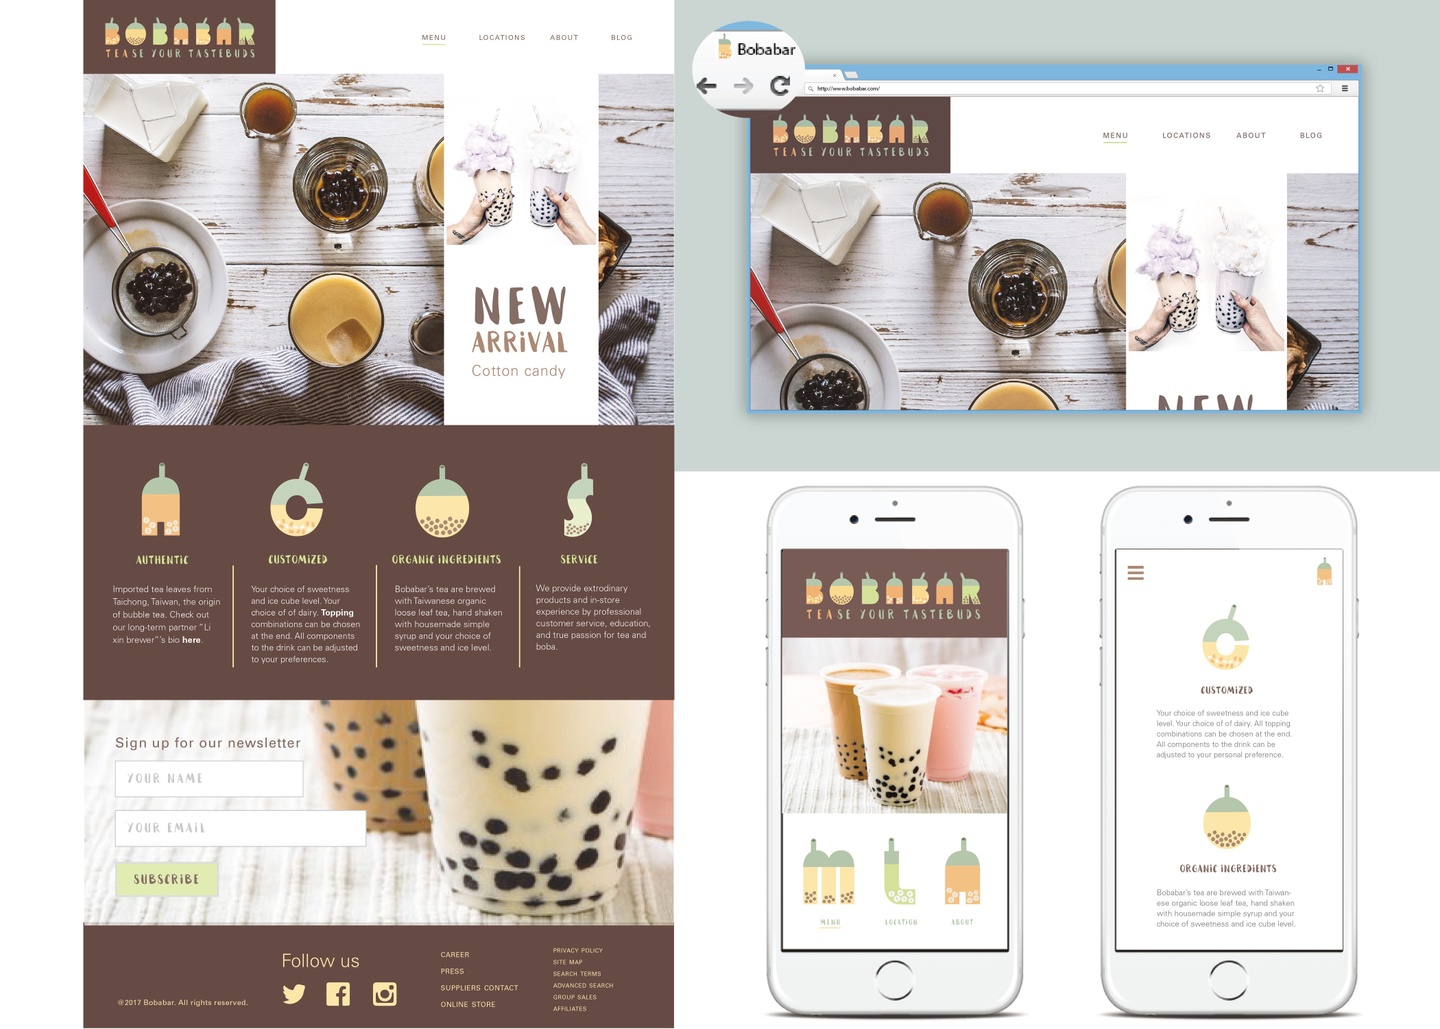 Branding package including web and mobile layouts for Bobabar. Mix of photo images and brown and pastel color palette of text, and logo, and icons.